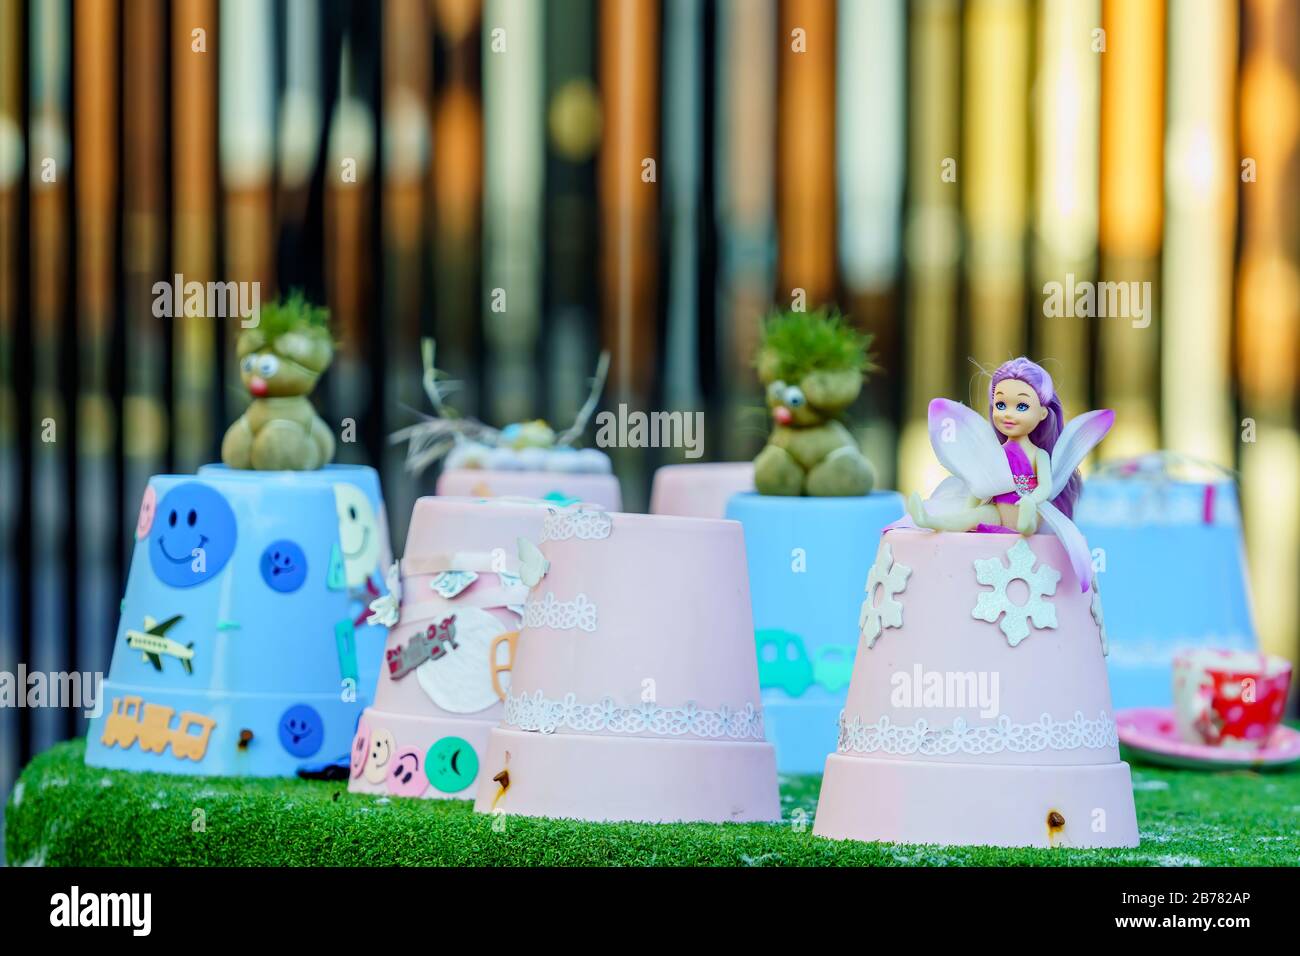 Small smiling fairy with wings and green trolls sitting on flower pots. Selective focus and blurred background Stock Photo